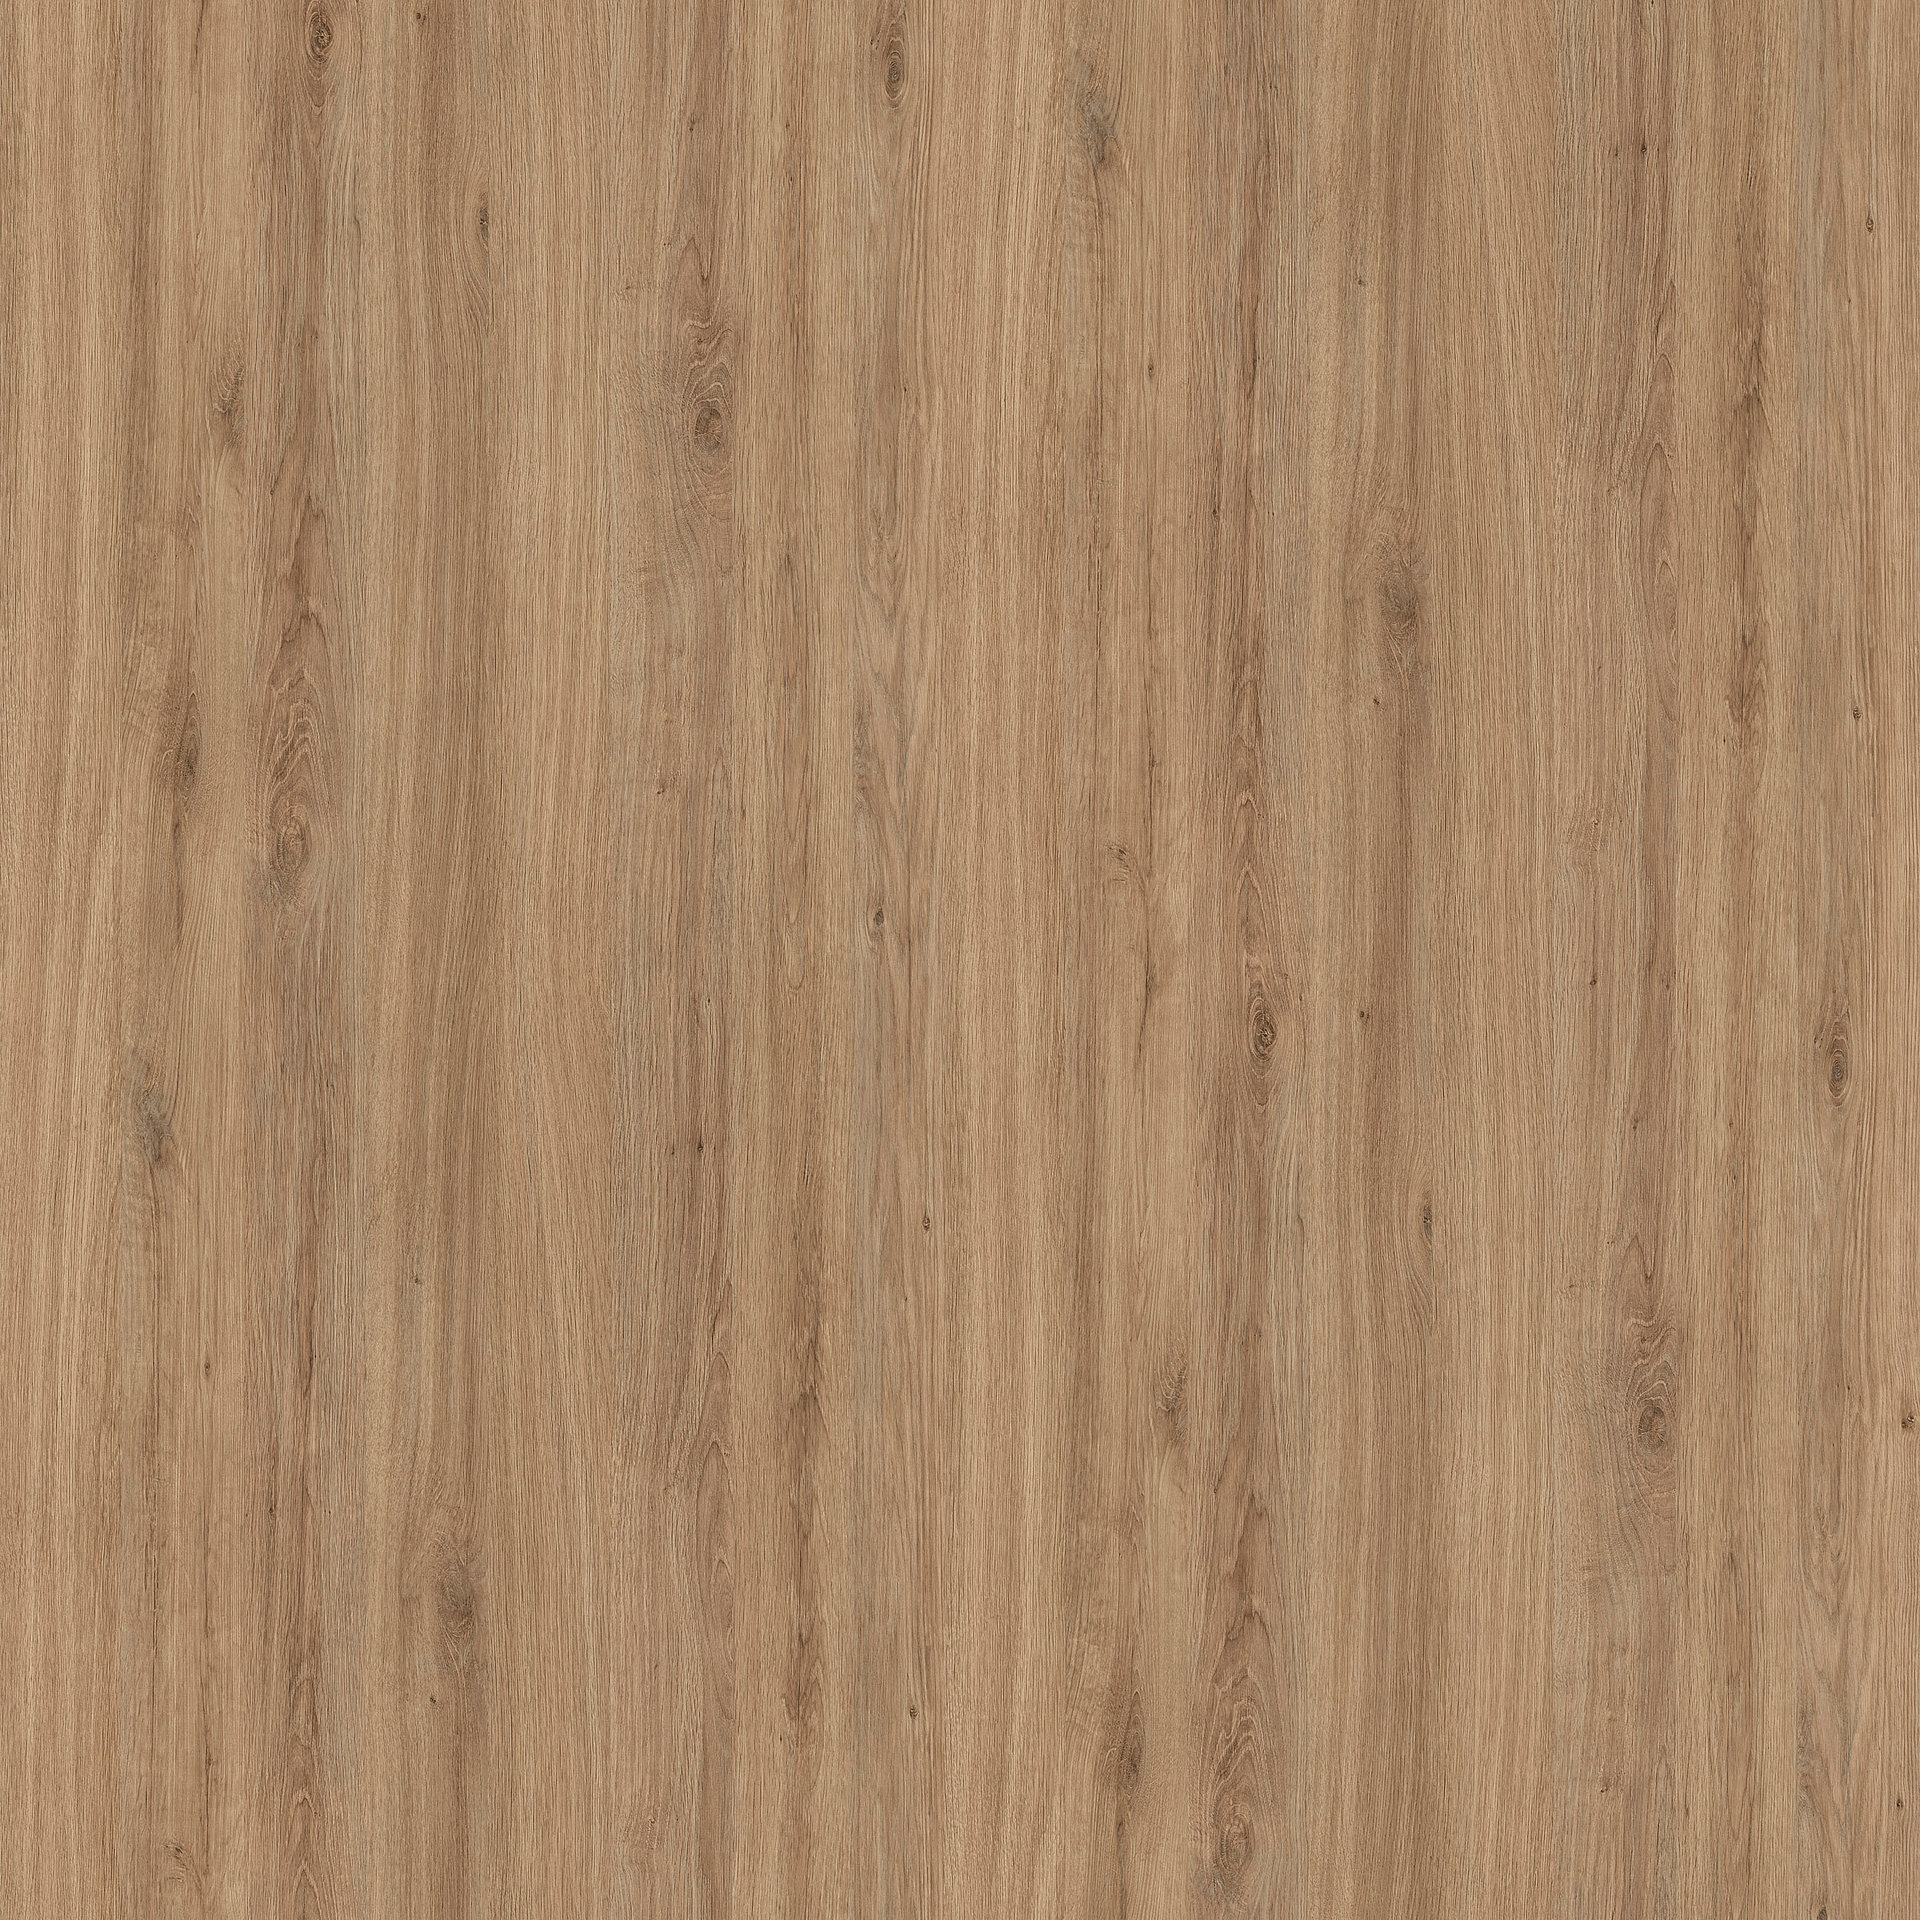 DecoBoard P2 - R 20038 MO Rovere Chalet Naturale (OLD R 4284)  8 mm - 2800 x 2100 mm